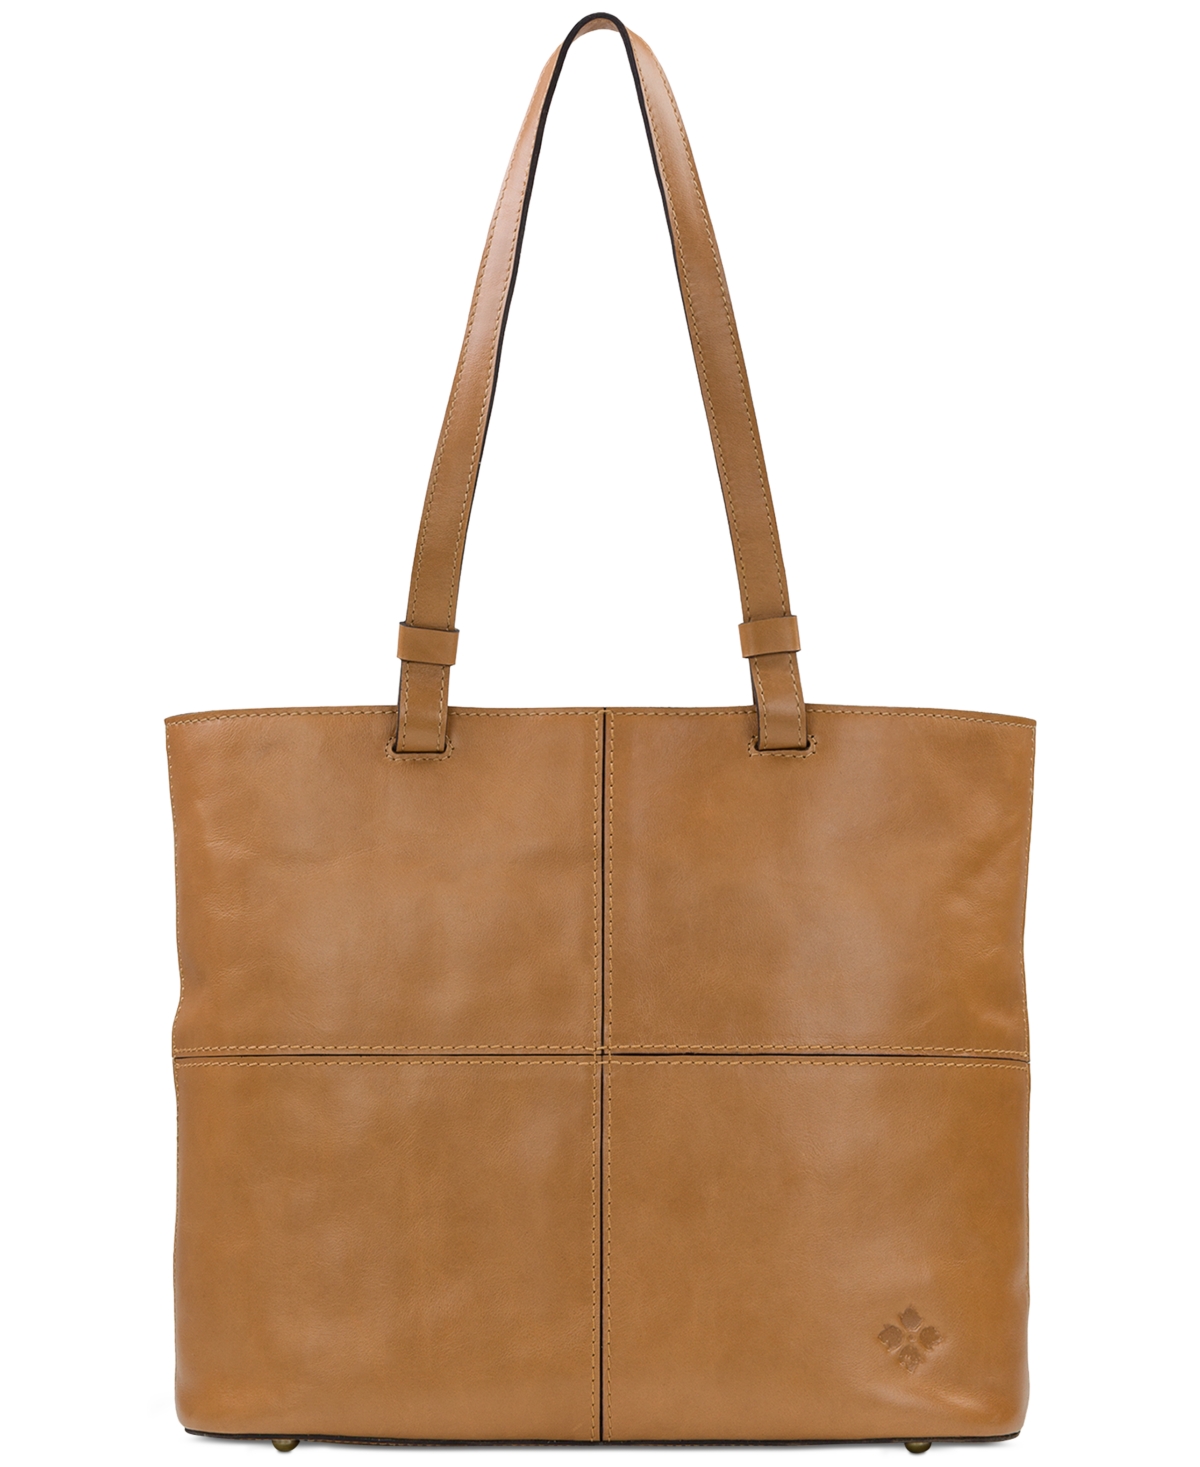 Danville Leather Tote, Created for Macy's - Naturale